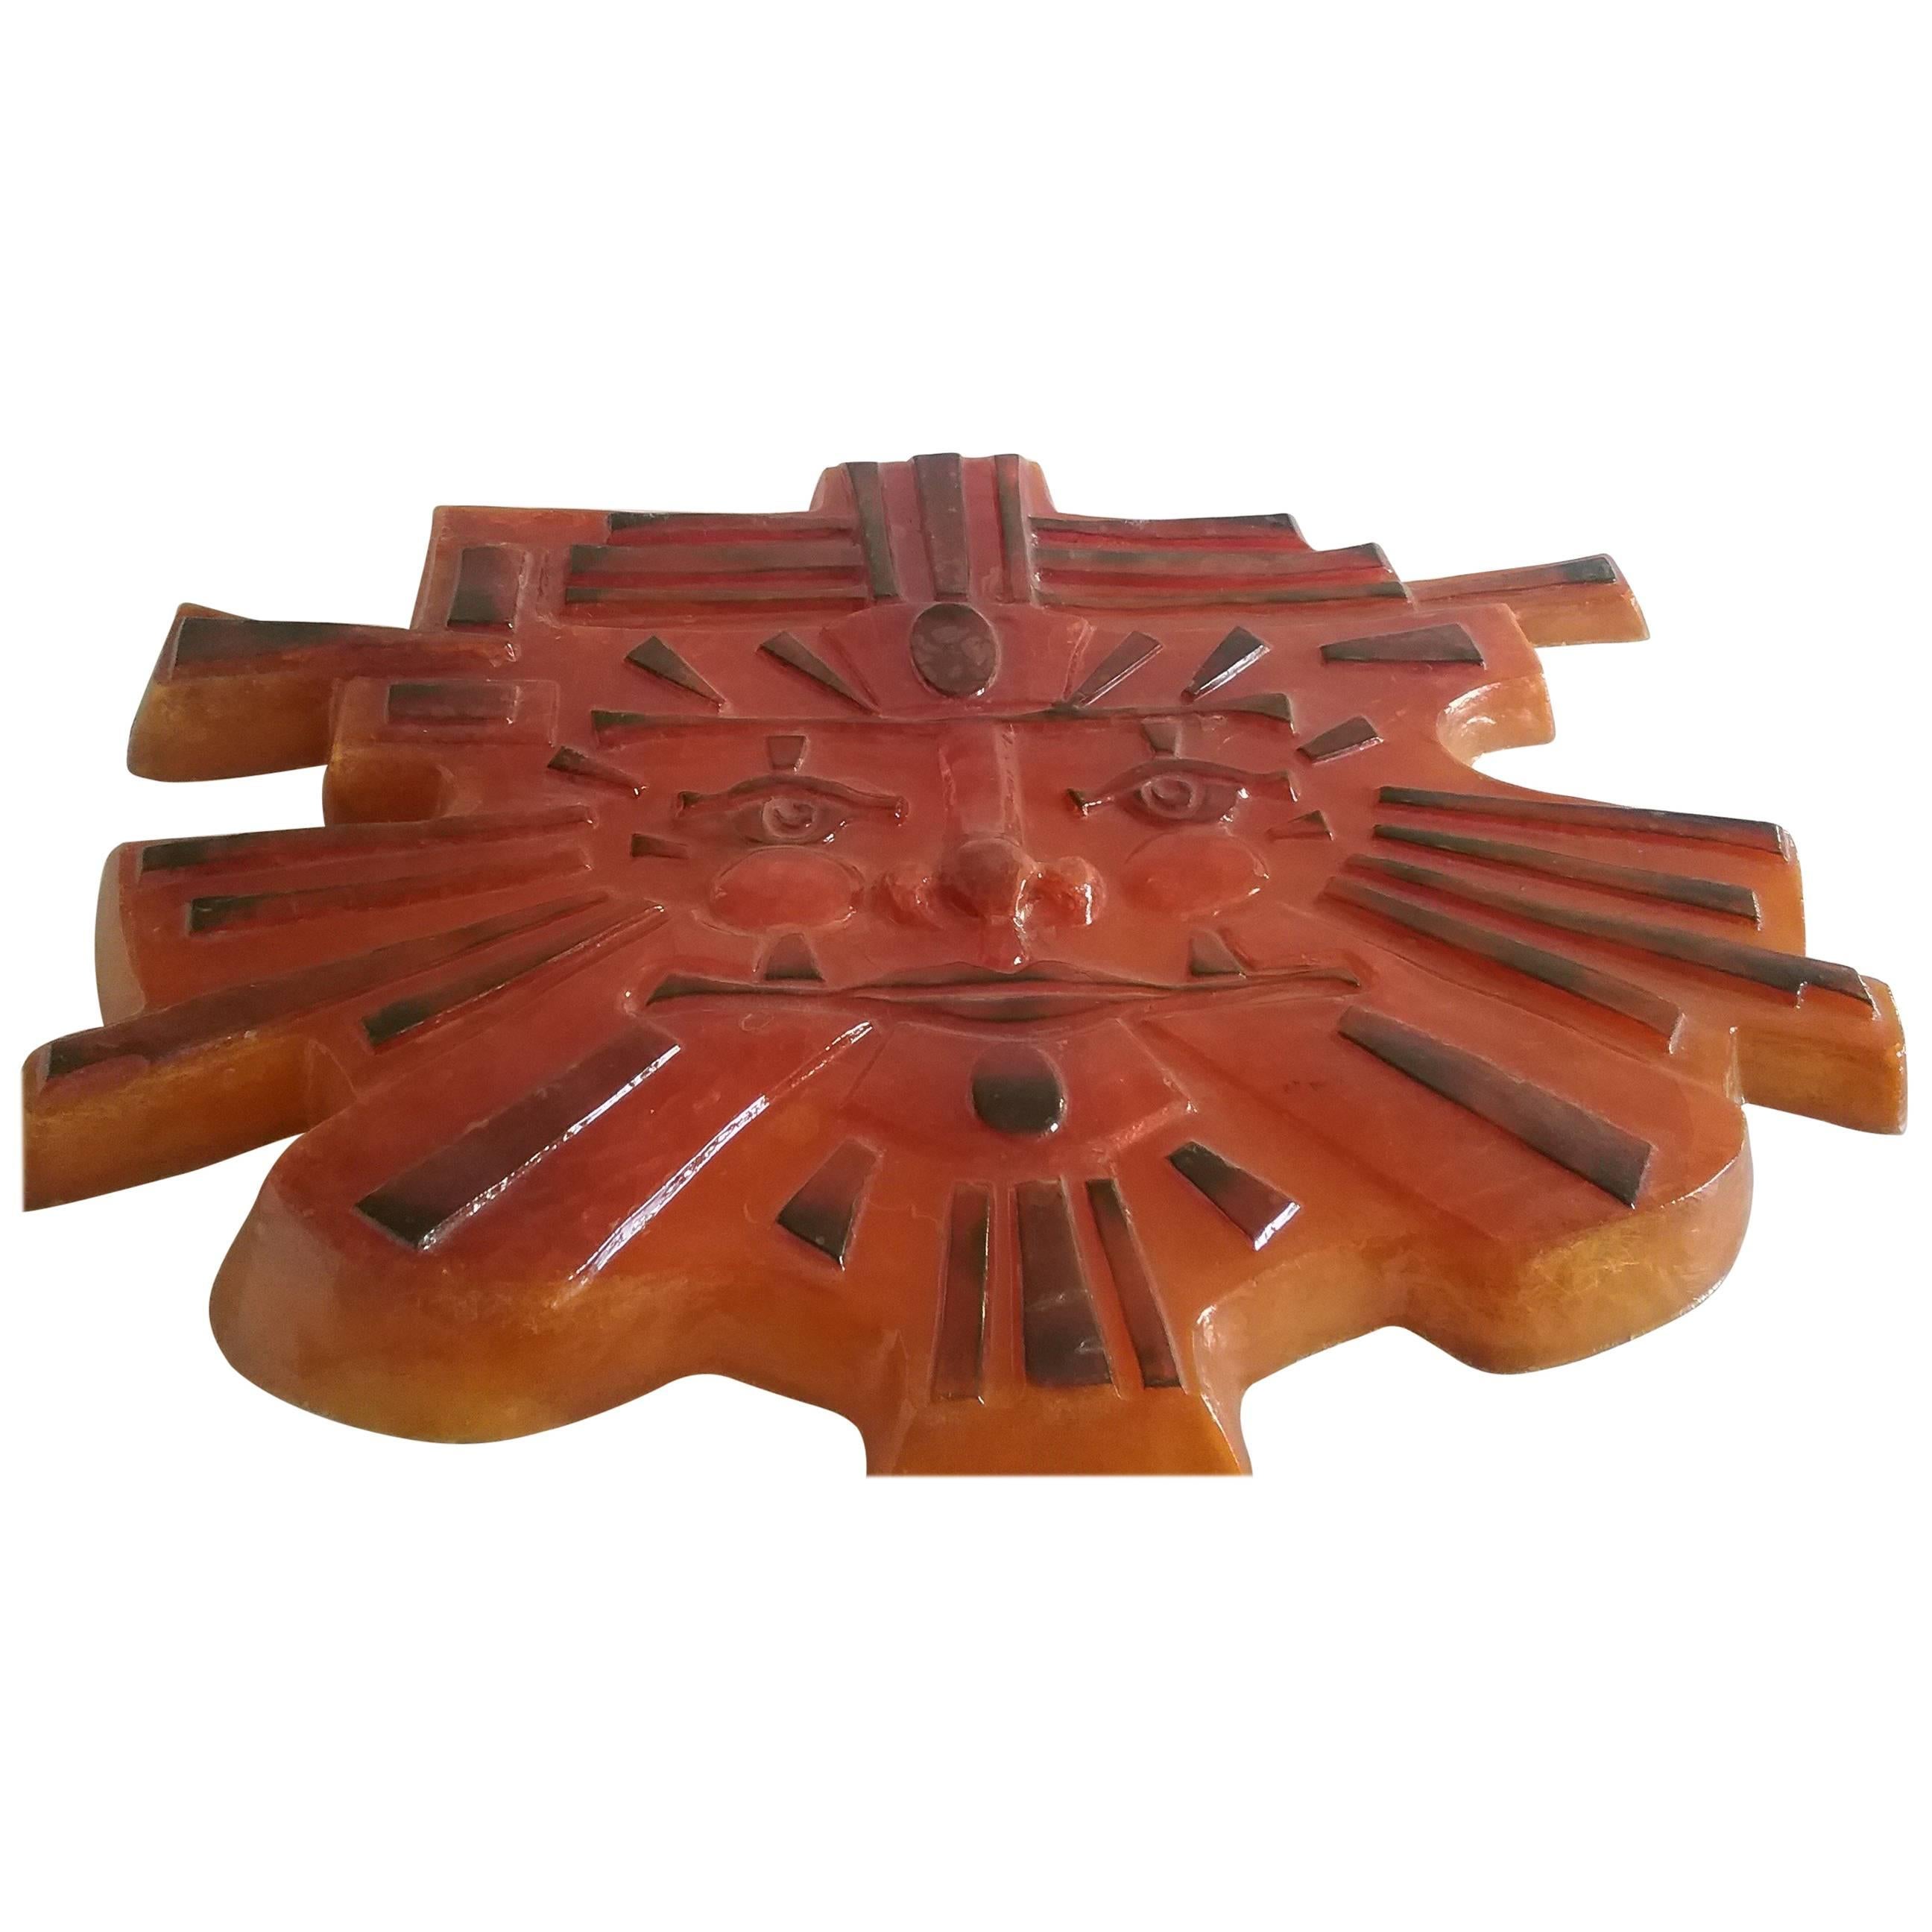 1970s Great Wall Sculpture Sun, Made Out of Orange Glass Fibre, Signed